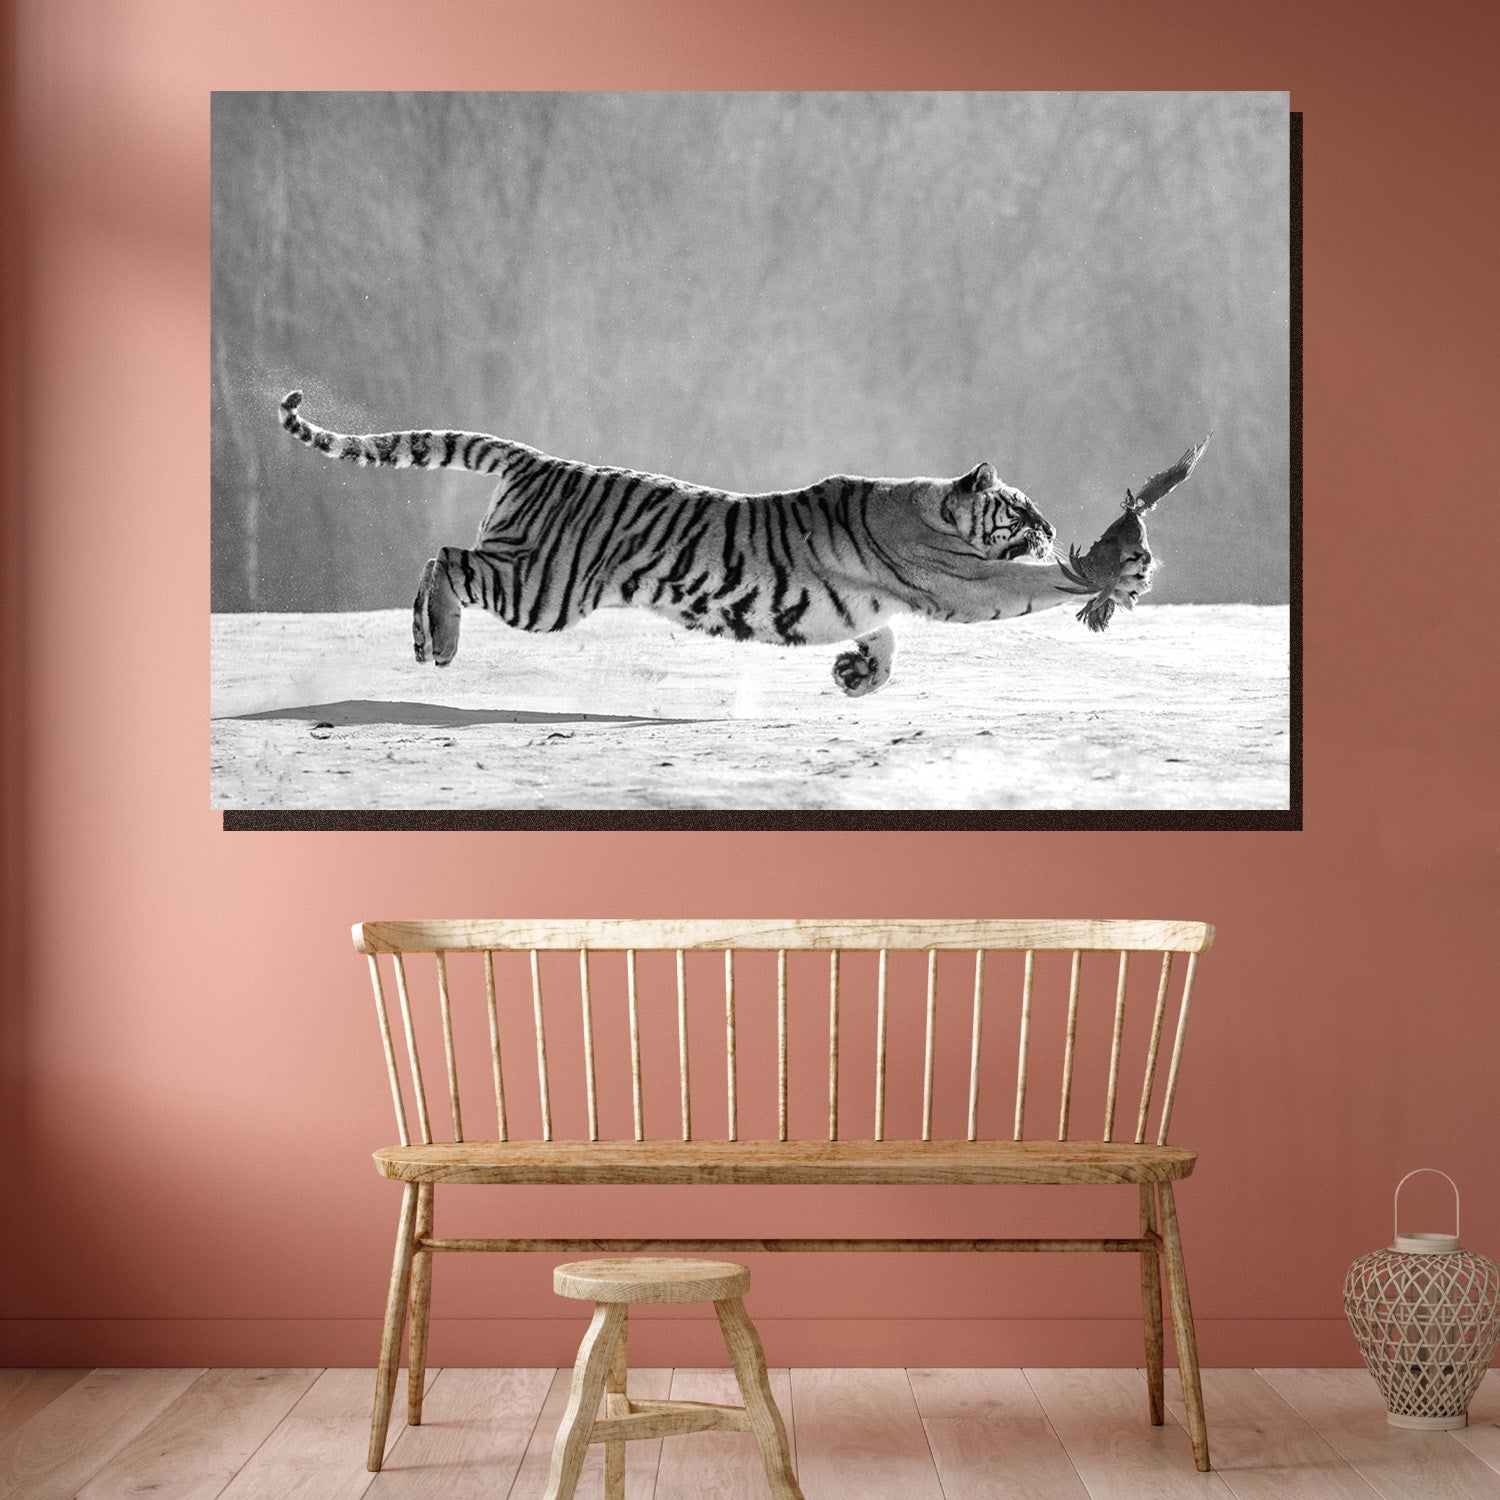 https://cdn.shopify.com/s/files/1/0387/9986/8044/products/SiberianTigerCanvasArtprintStretched-4.jpg